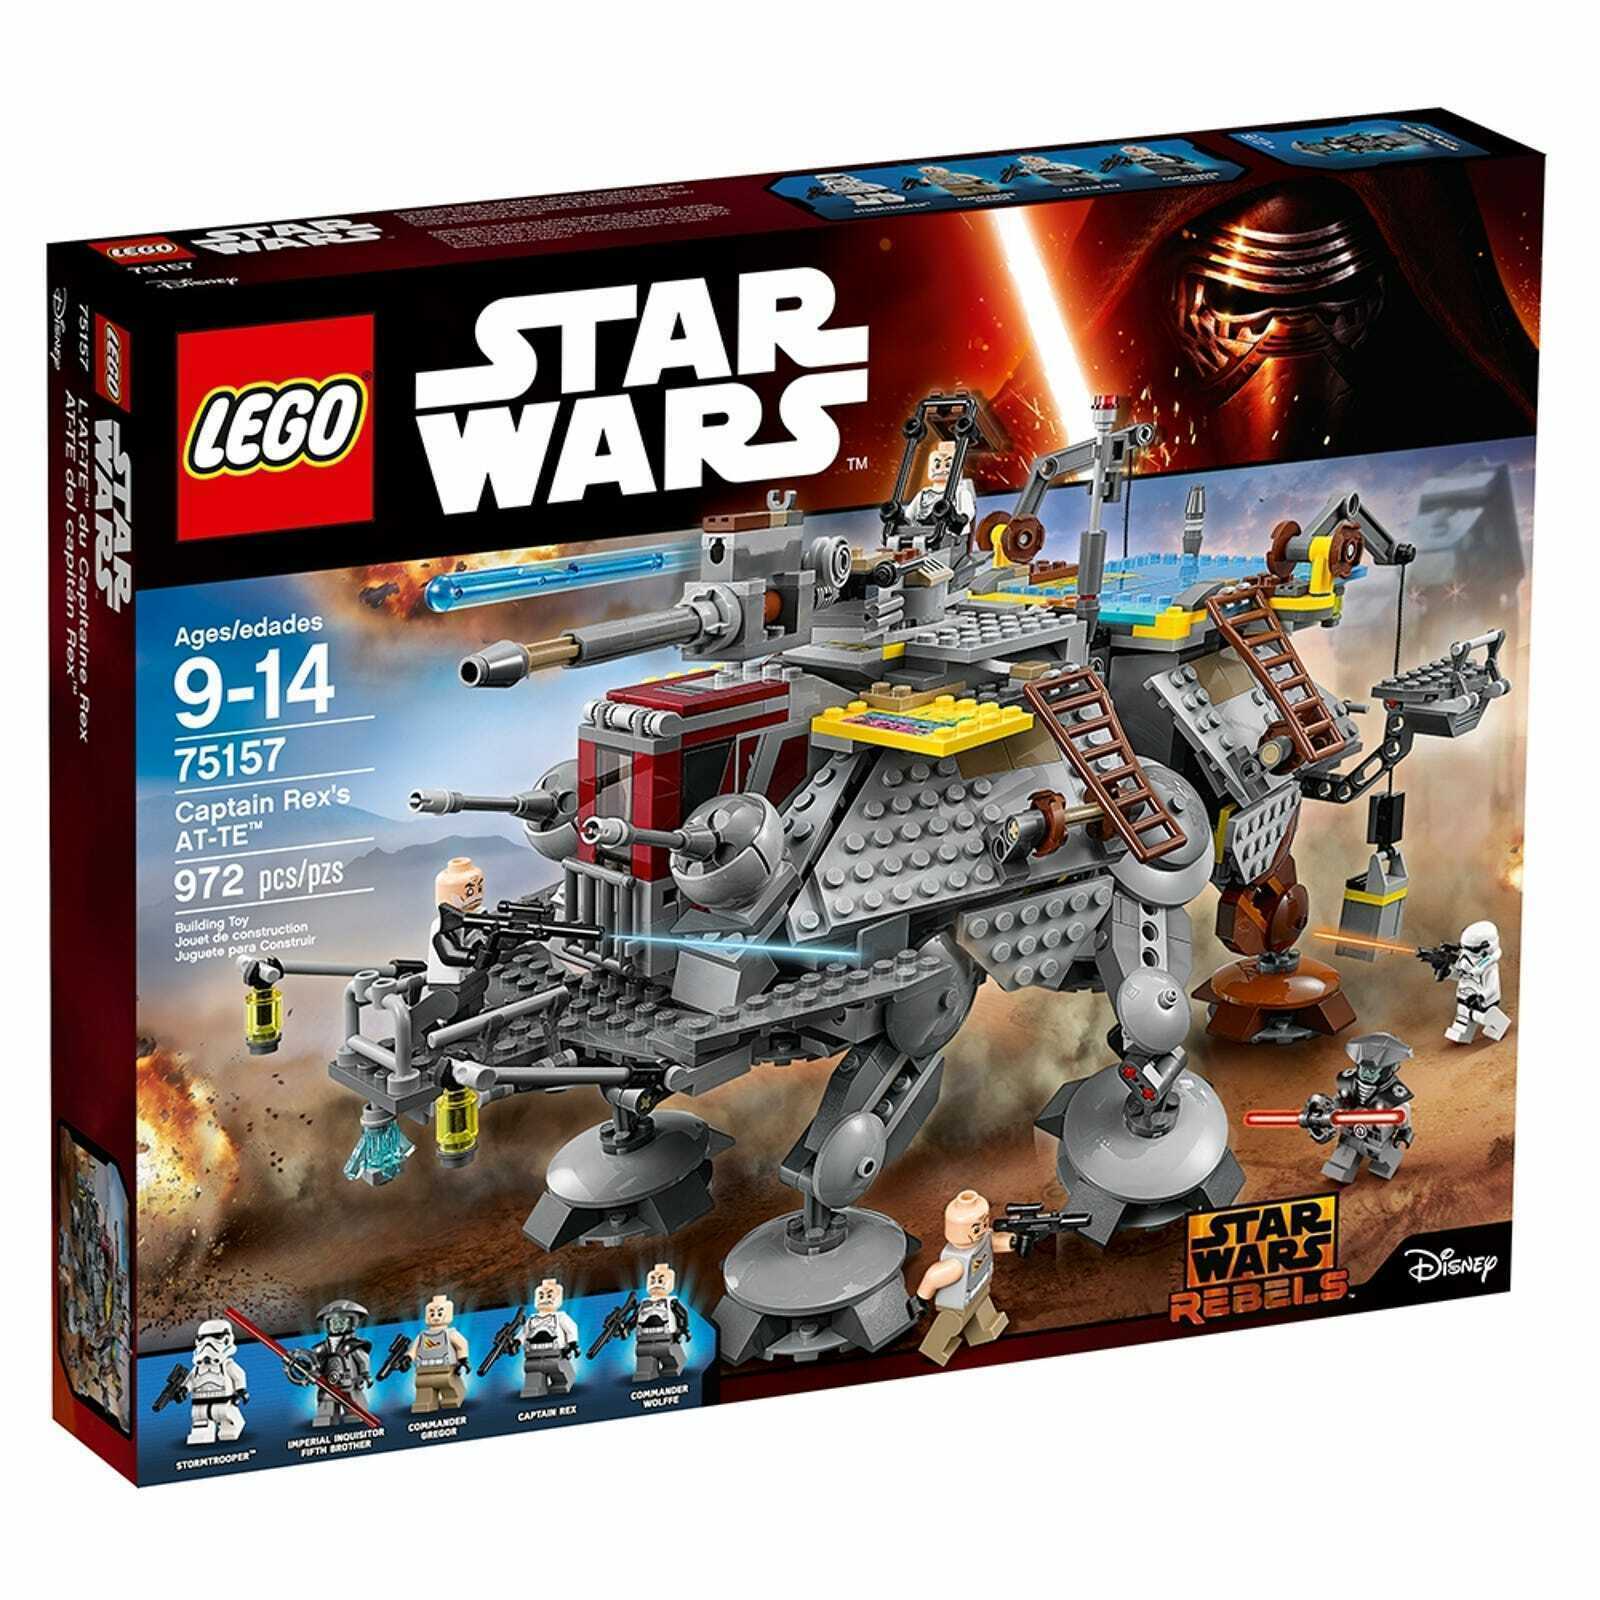 Lego Star Wars 75157 : Captain Rex's AT-TE New Sealed With Free Shipping